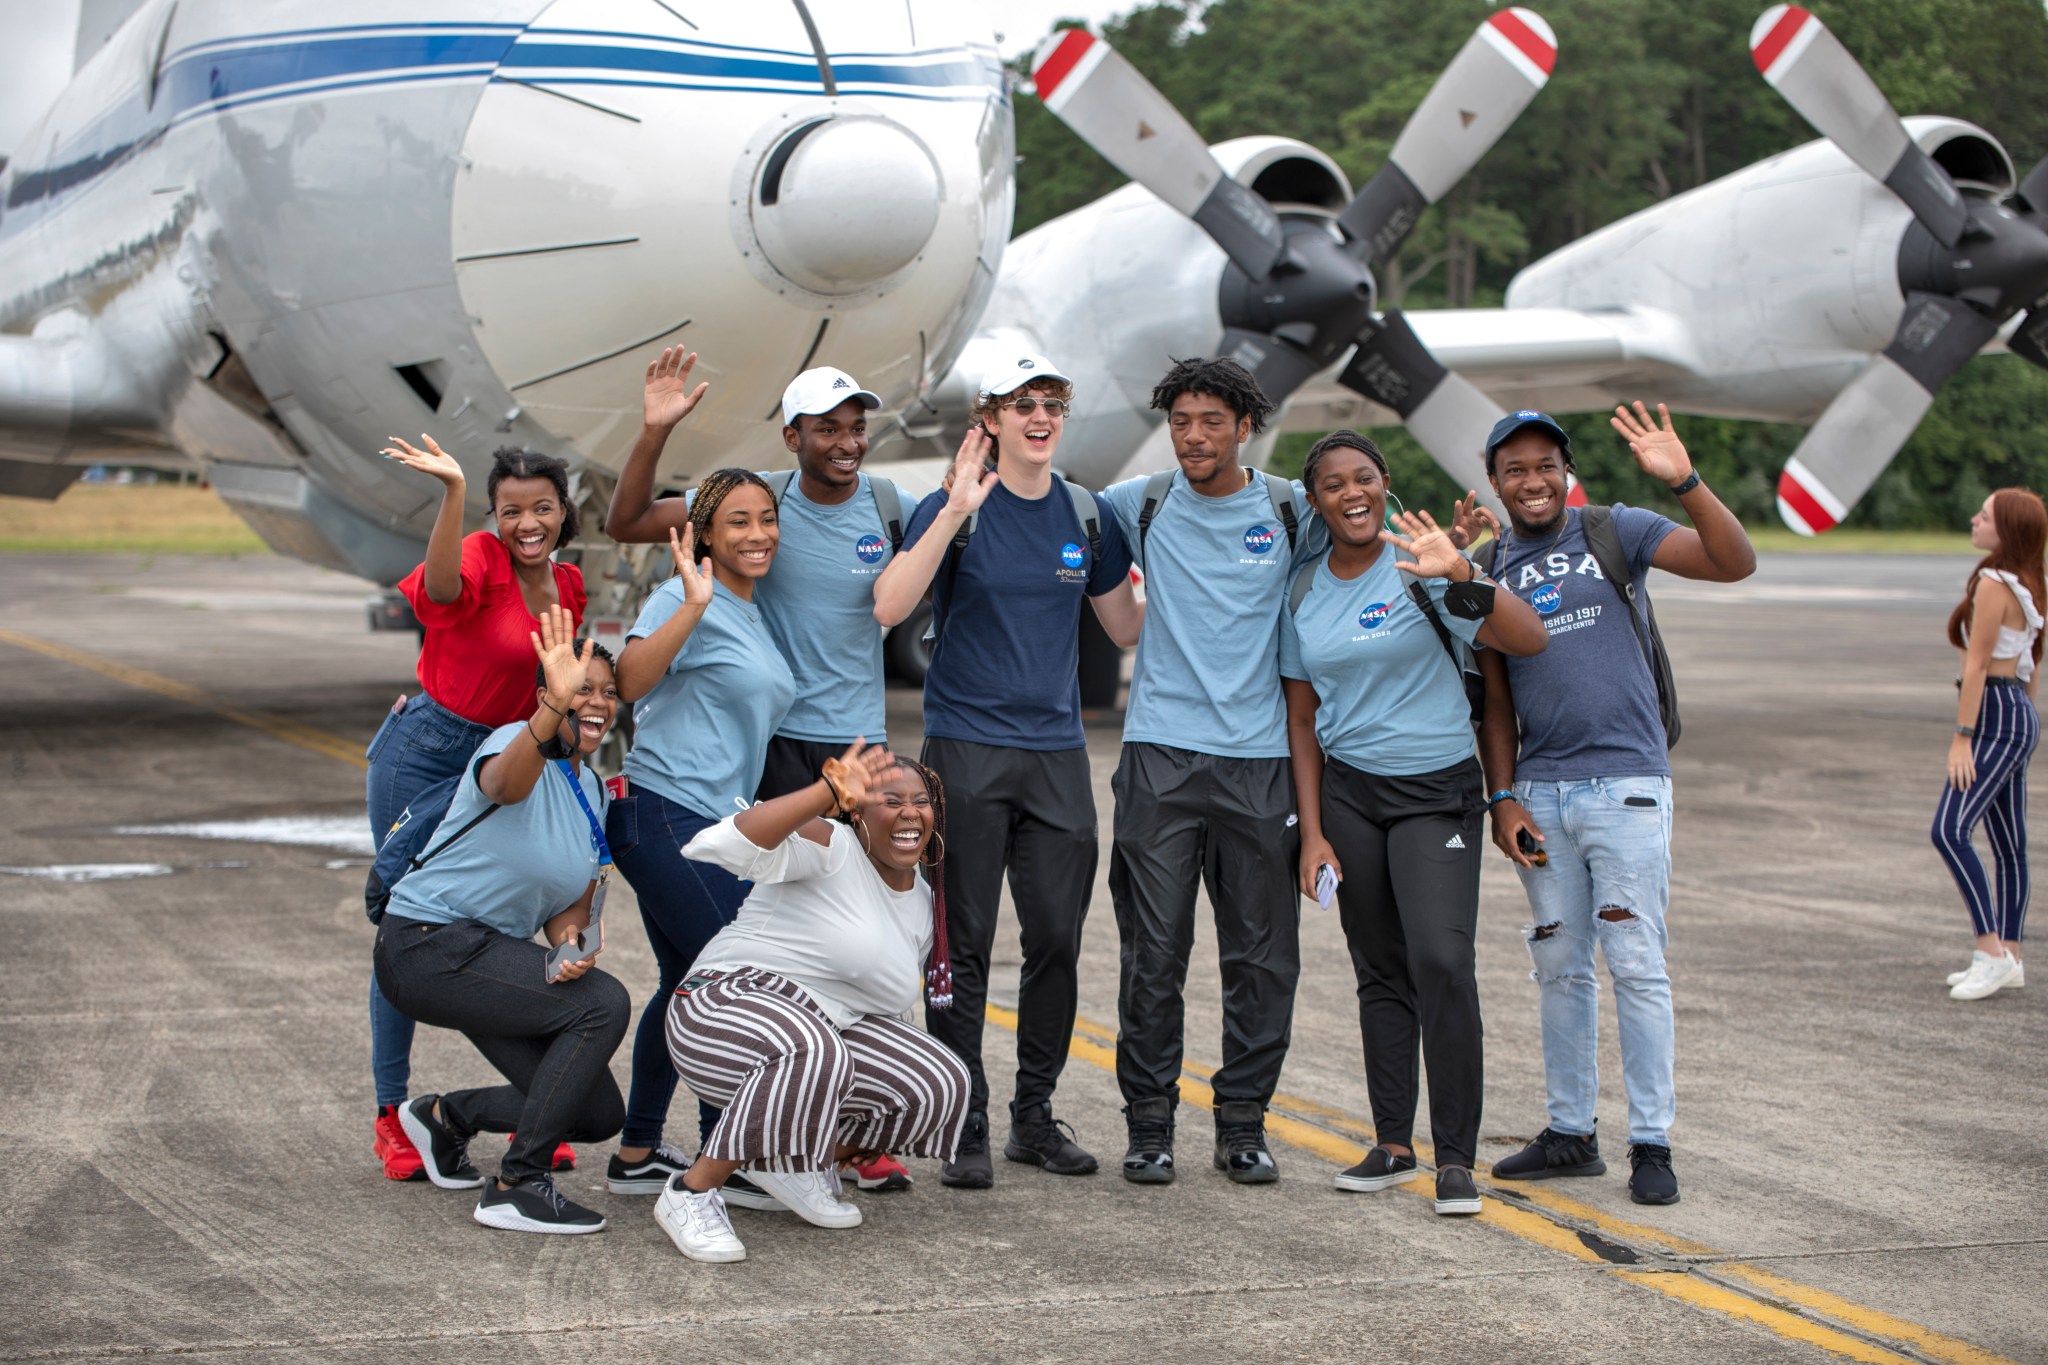 A group of nine young people wearing NASA t-shirts pose in front of the propellers and nose of an airplane on a runway.